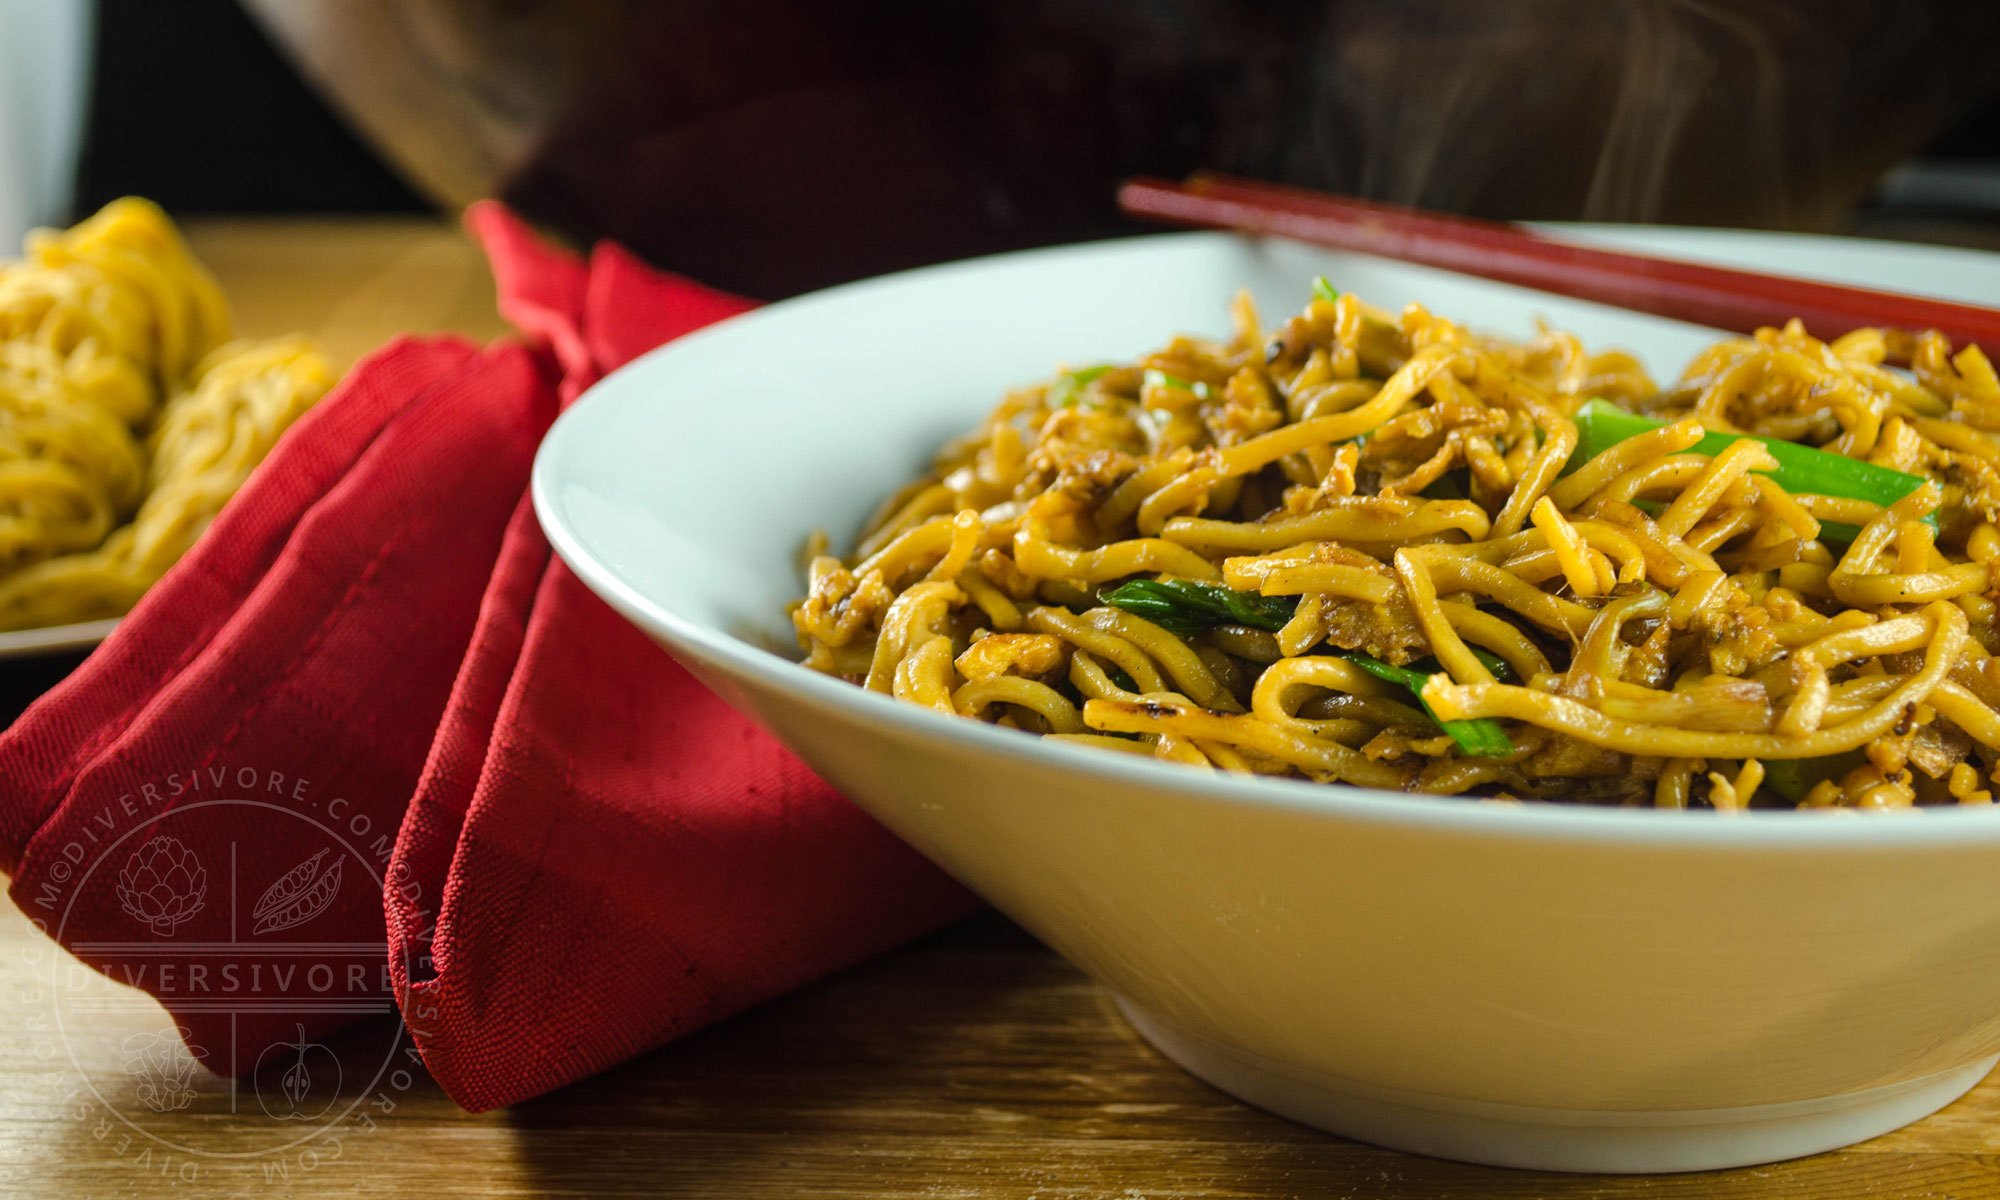 Cantonese Soy Sauce Pan-Fried Noodles - The Woks of Life